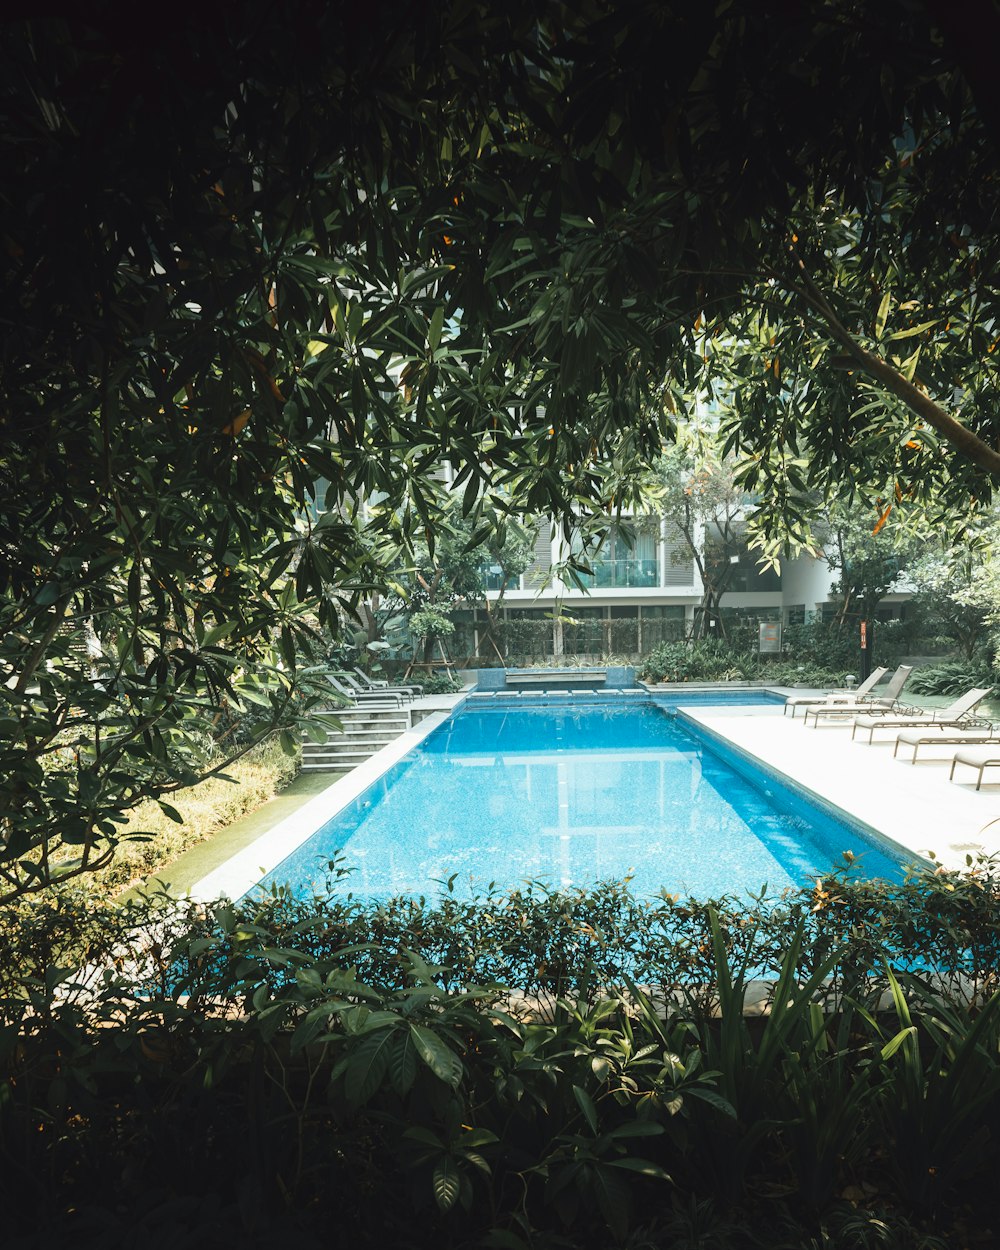 swimming pool surrounded by trees